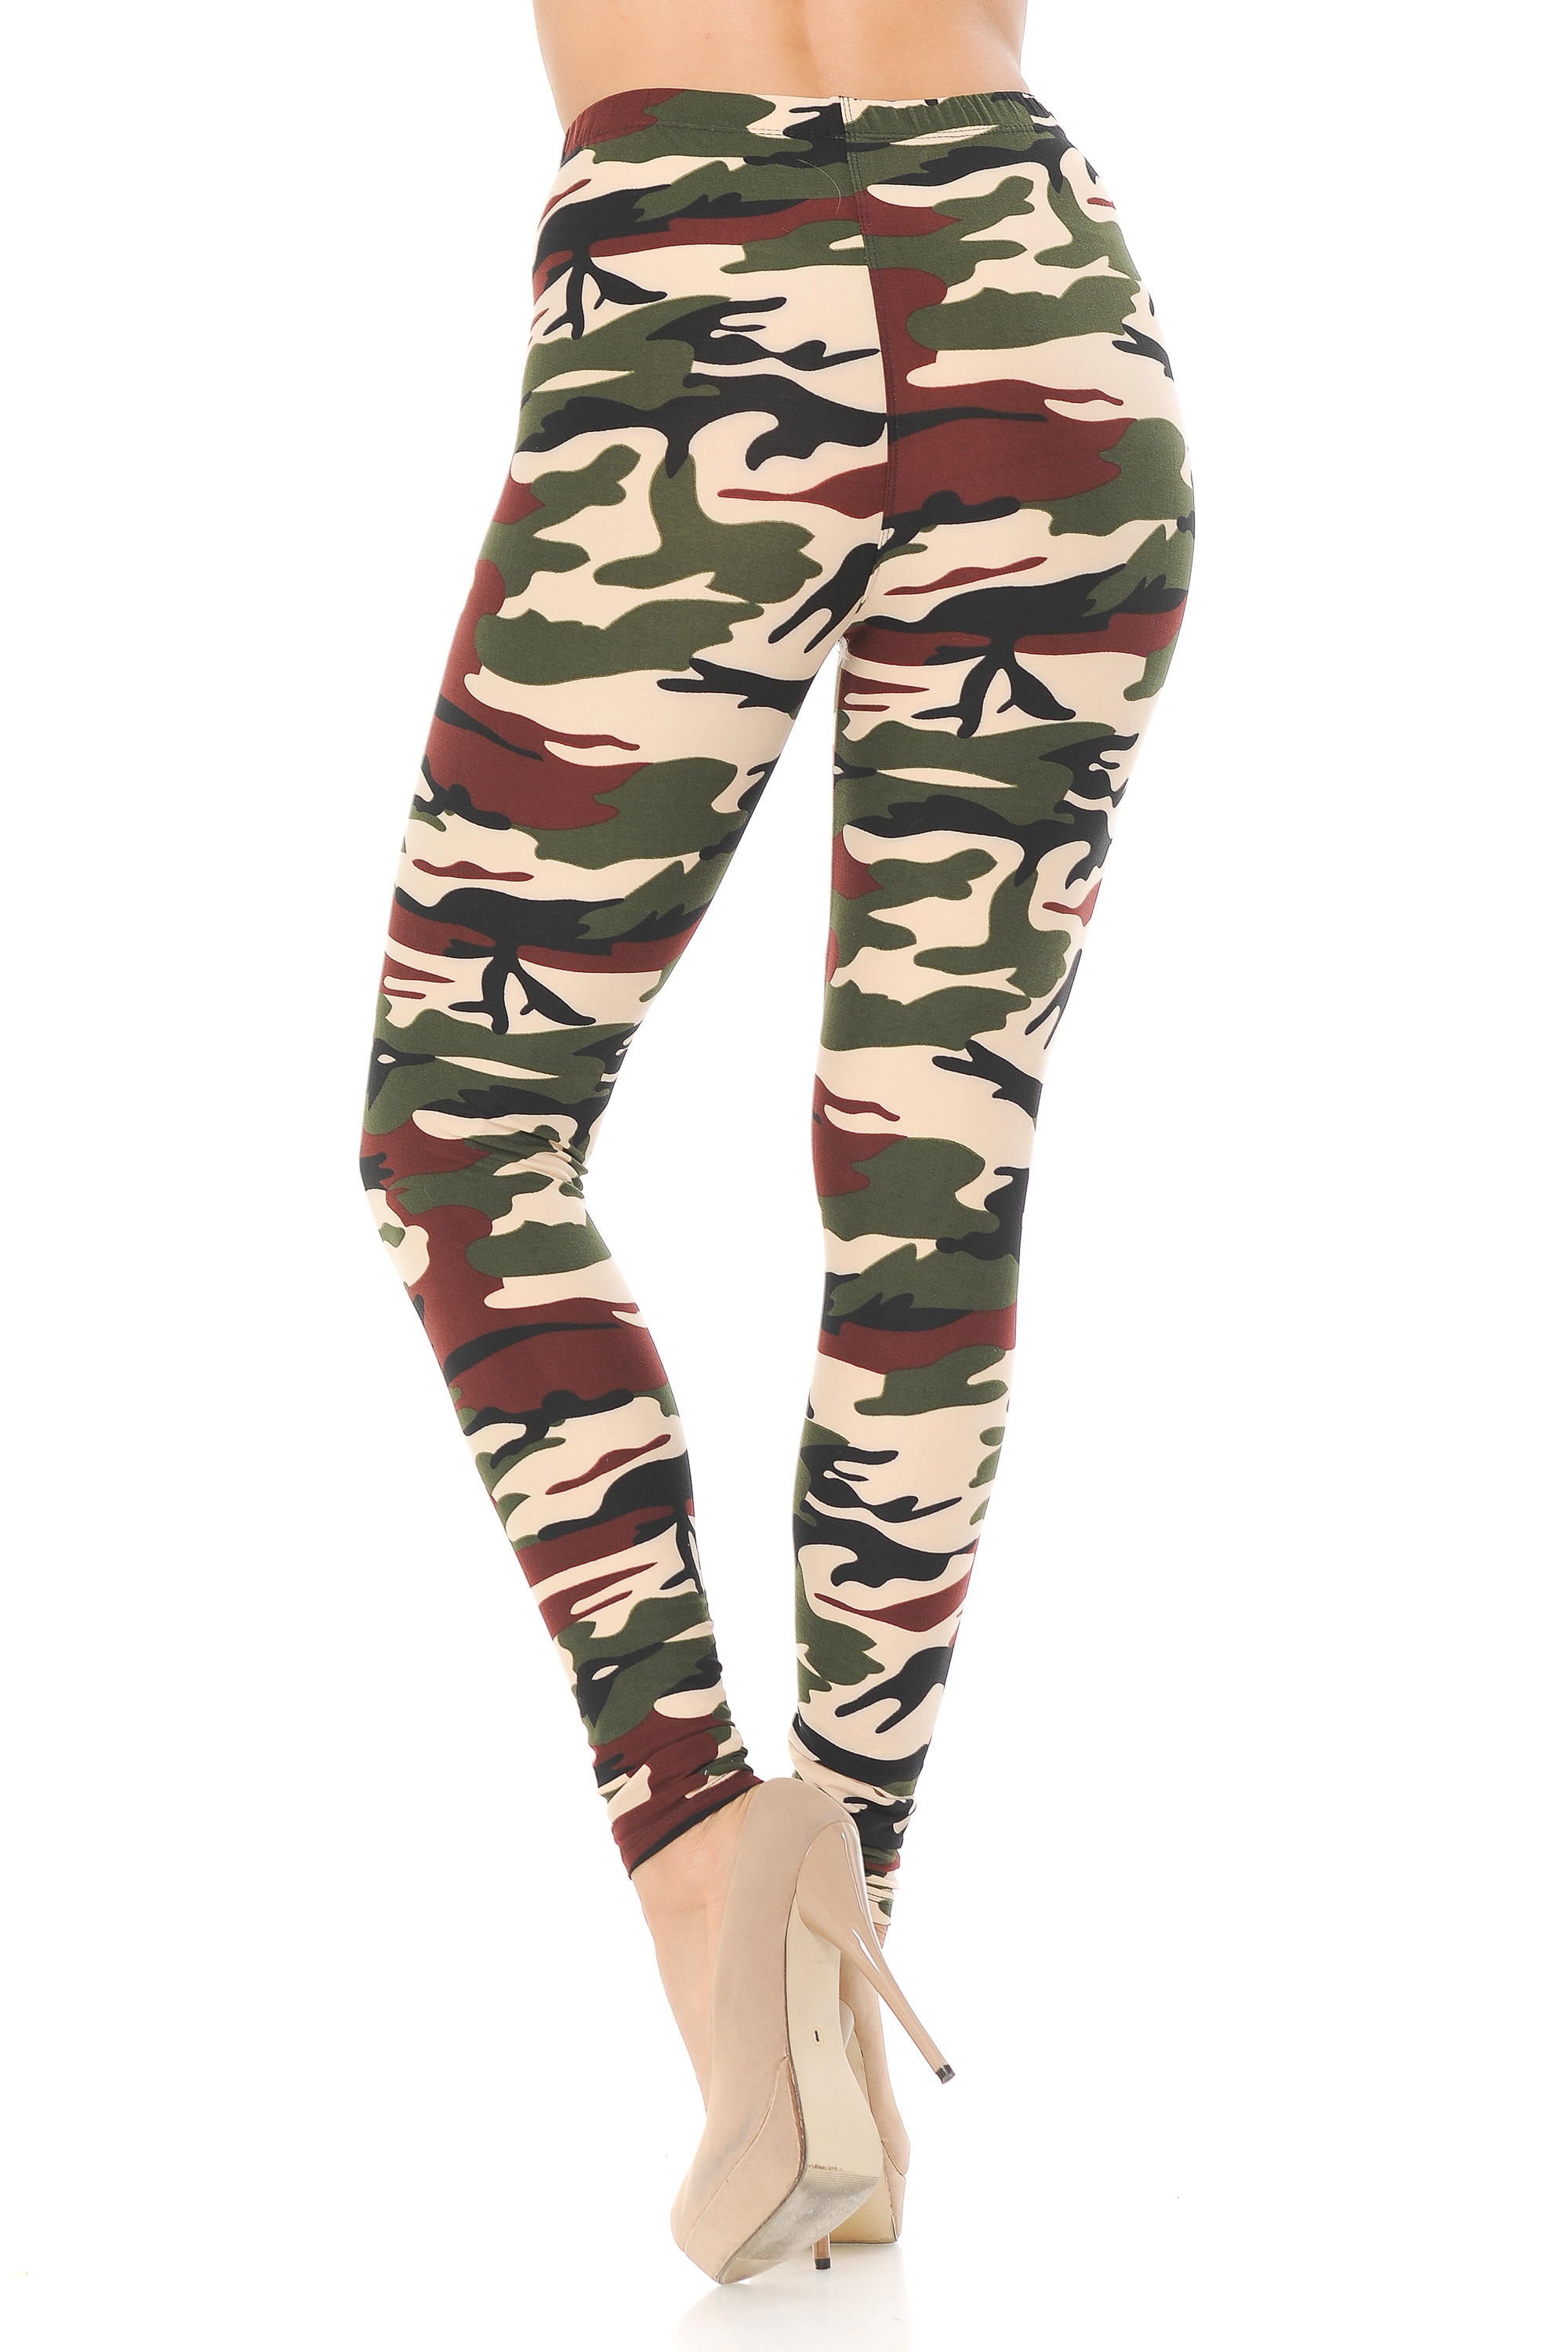 Wholesale Buttery Smooth Cozy Camouflage Extra Plus Size Leggings - 3X-5X